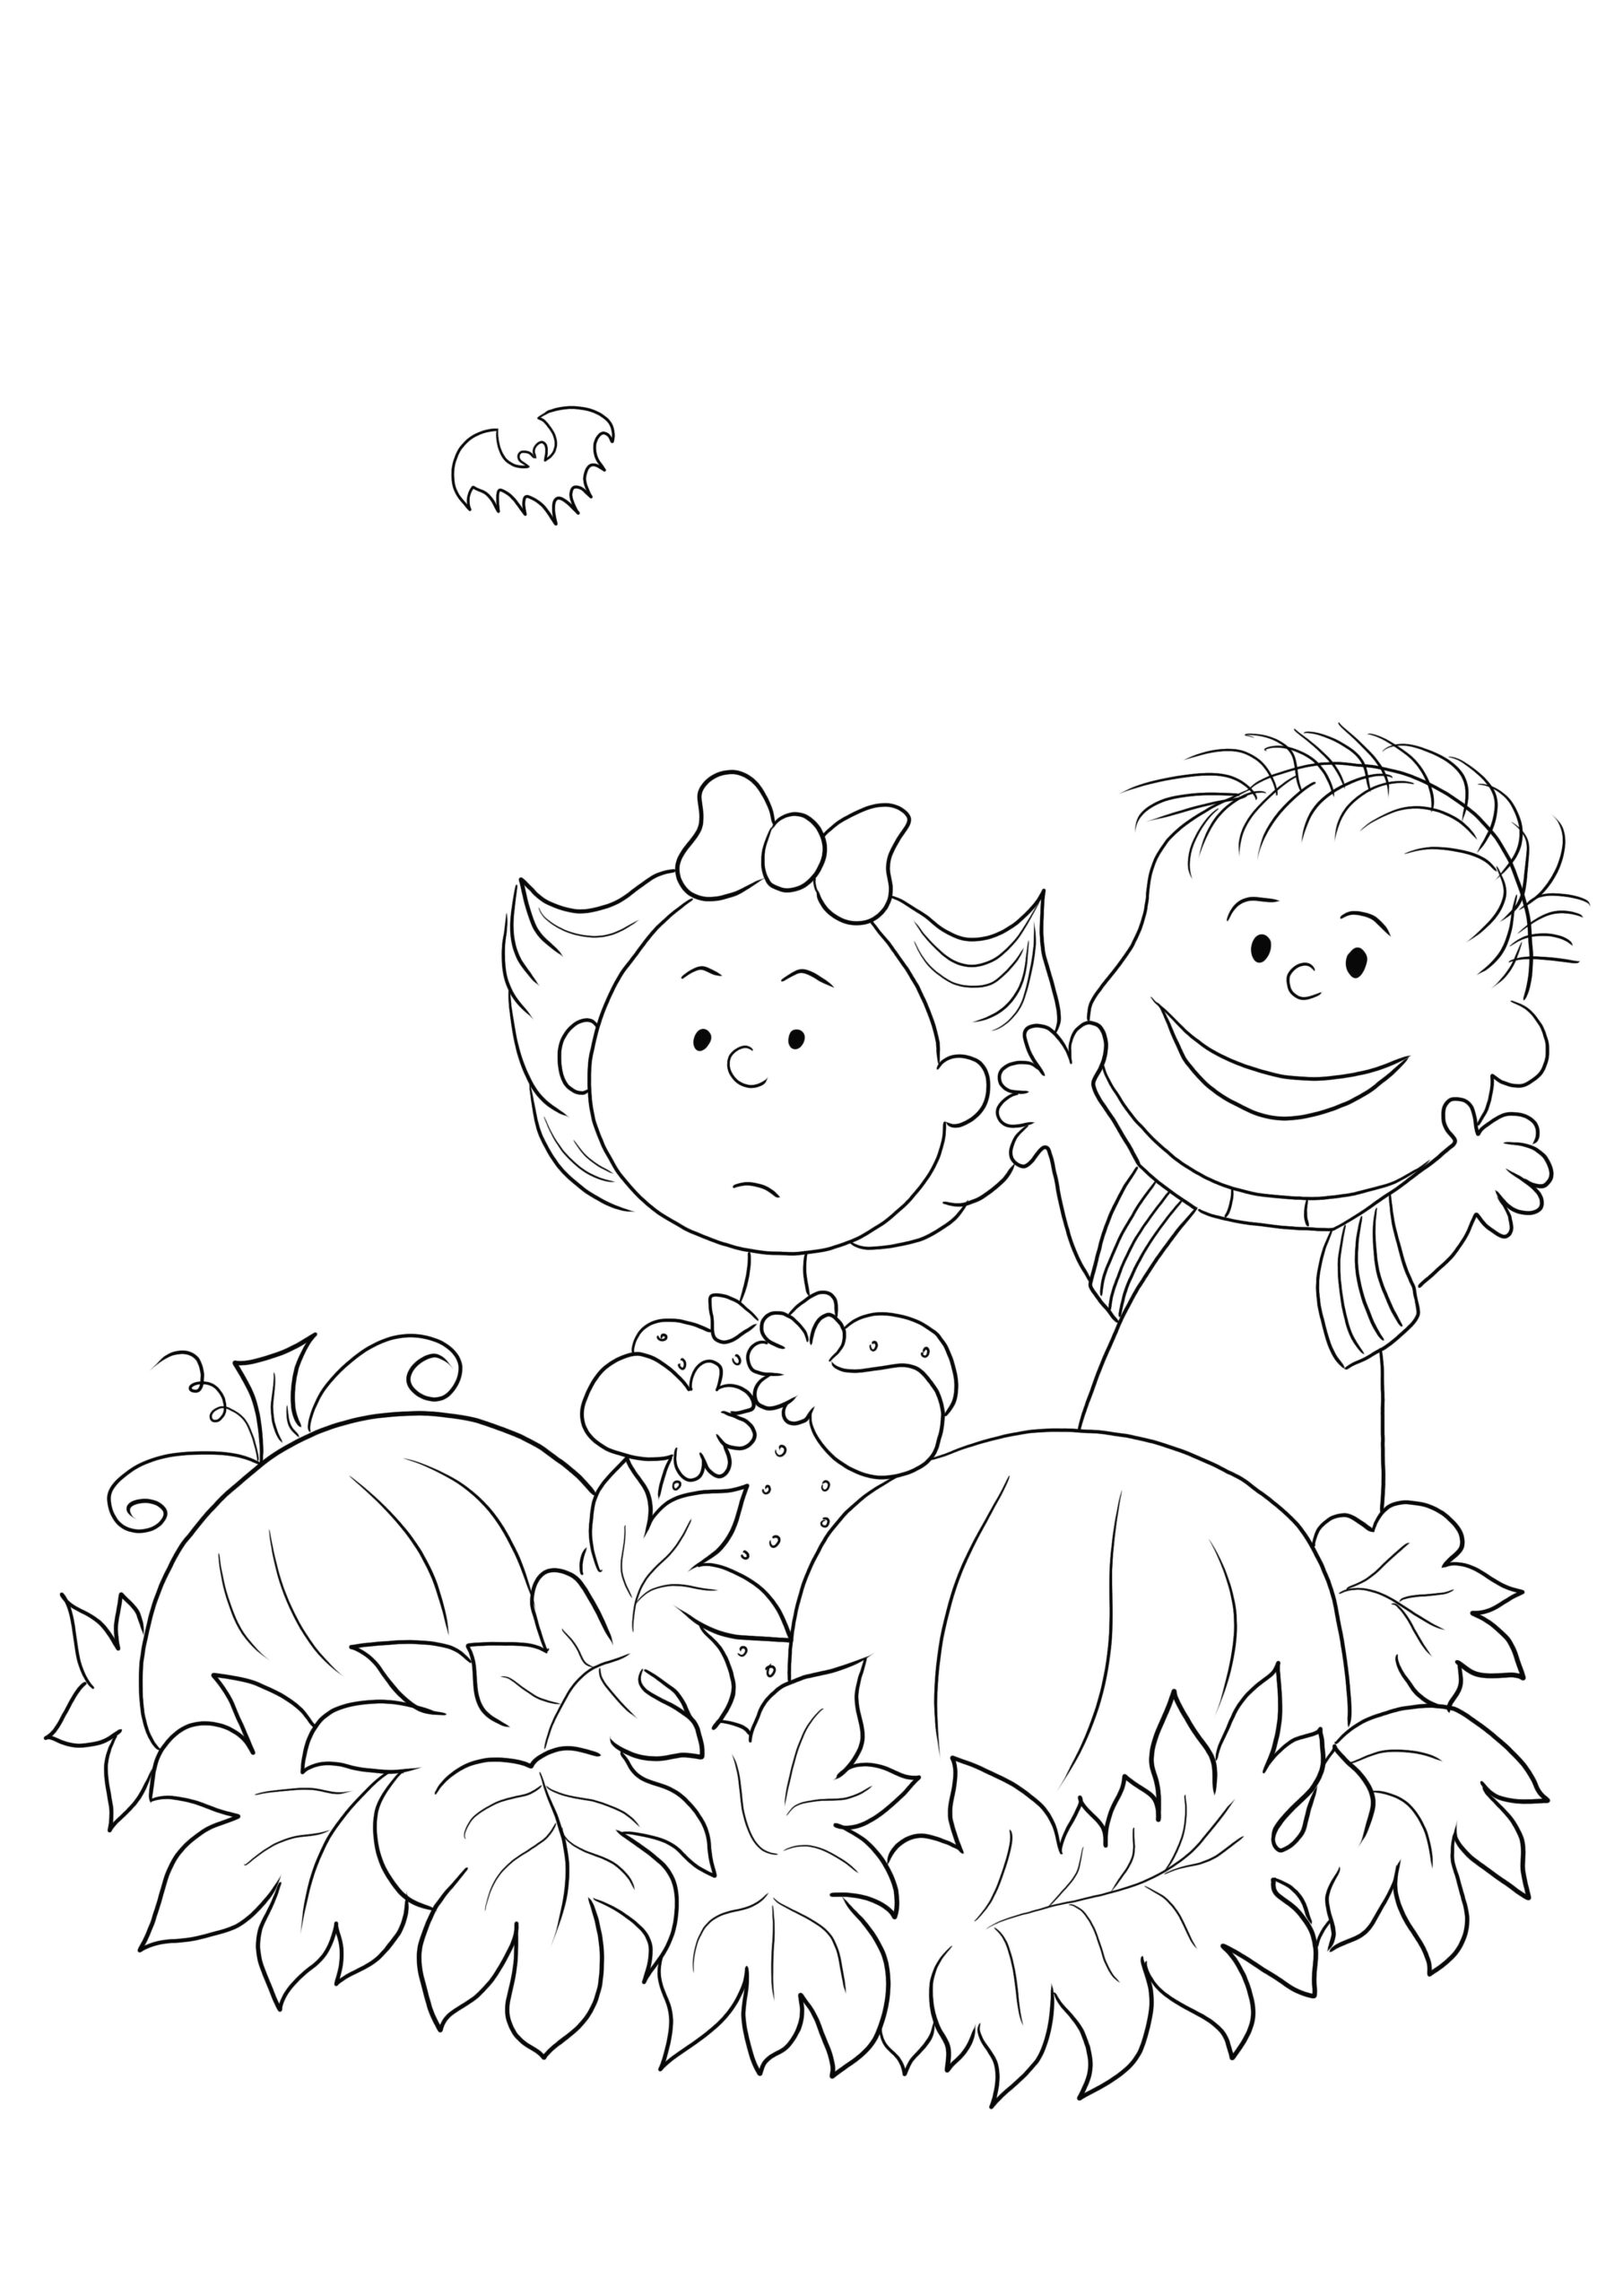 Charlie Brown And His Halloween Pumpkins Free To Download Or Print And Simple To Color Sheet - Free Printable Charlie Brown Halloween Coloring Pages